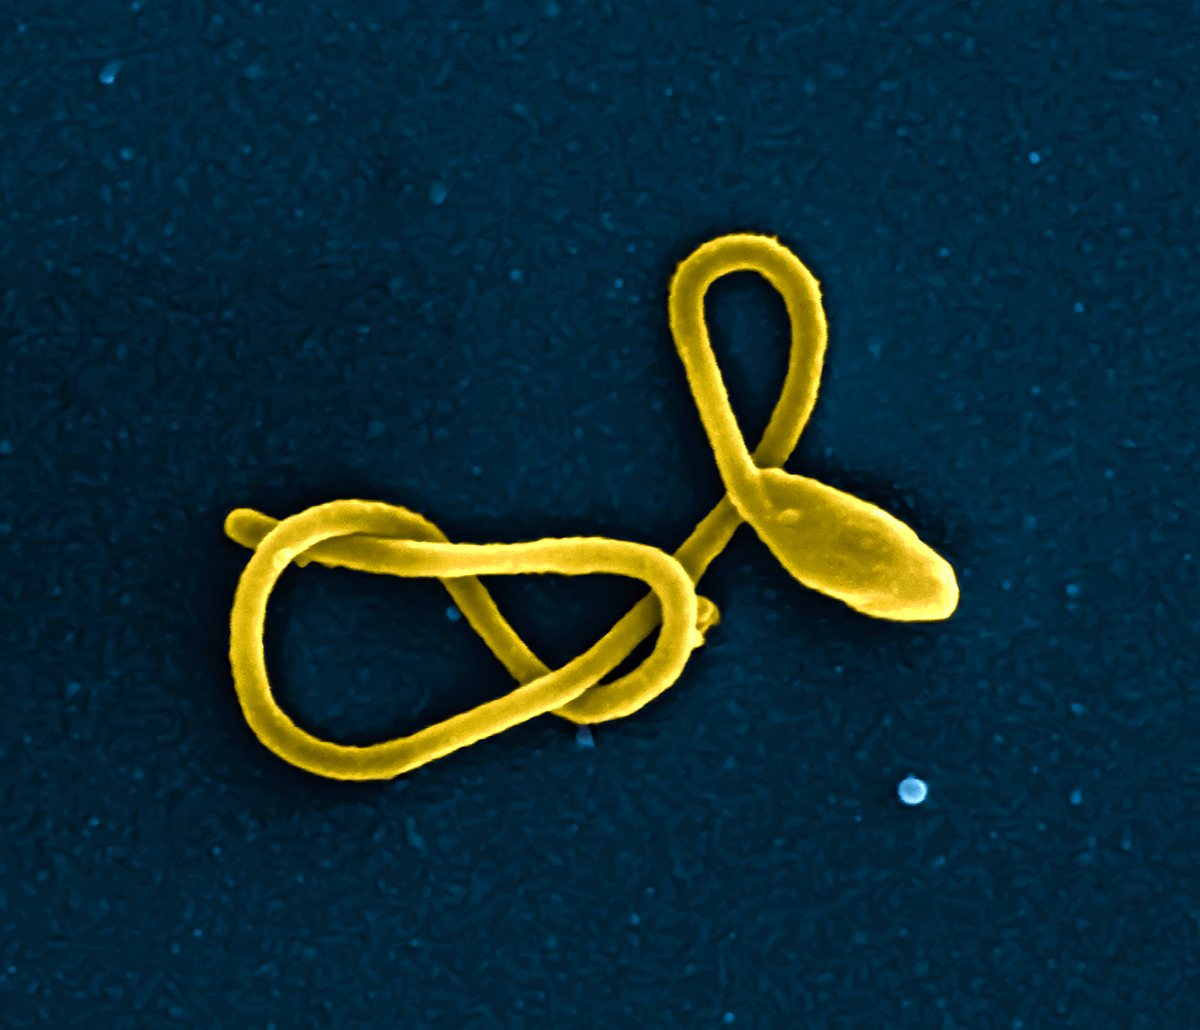 Image of Ebola virus particle